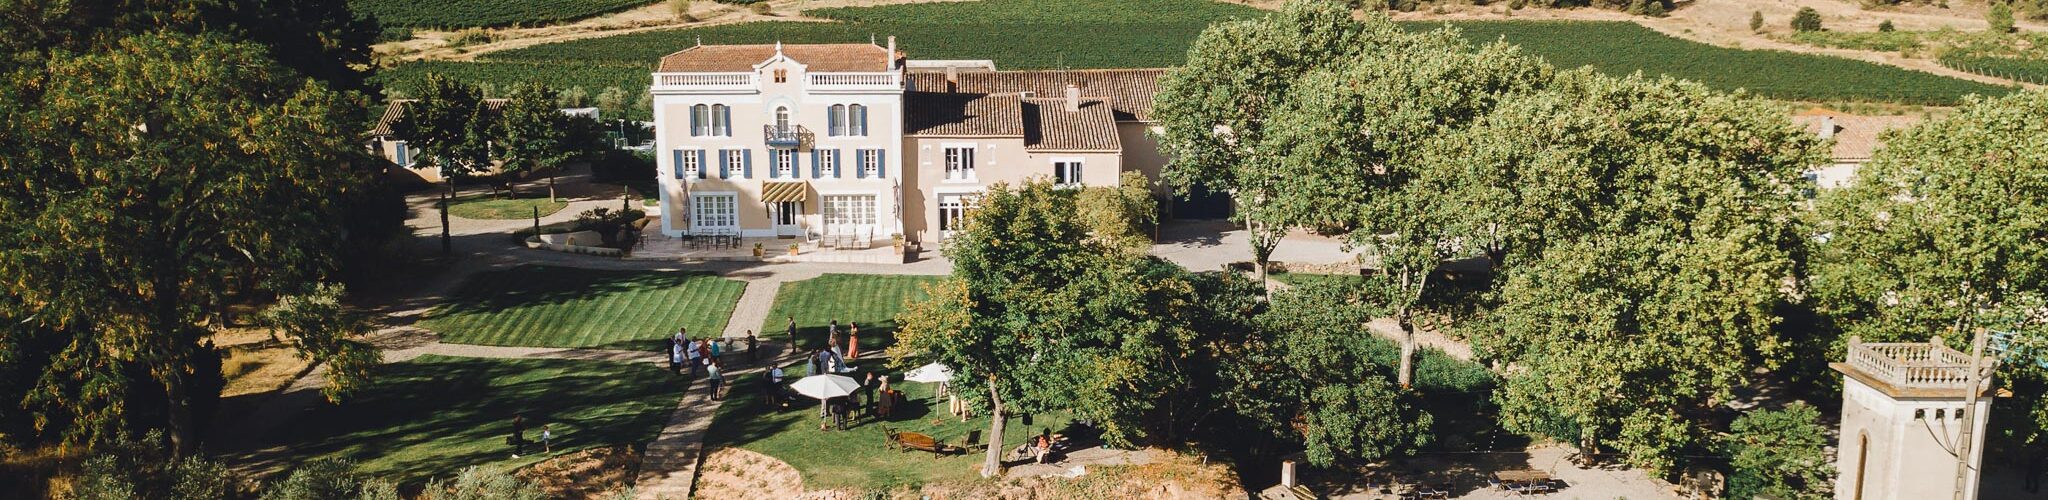 chateau canet south of france wedding venue